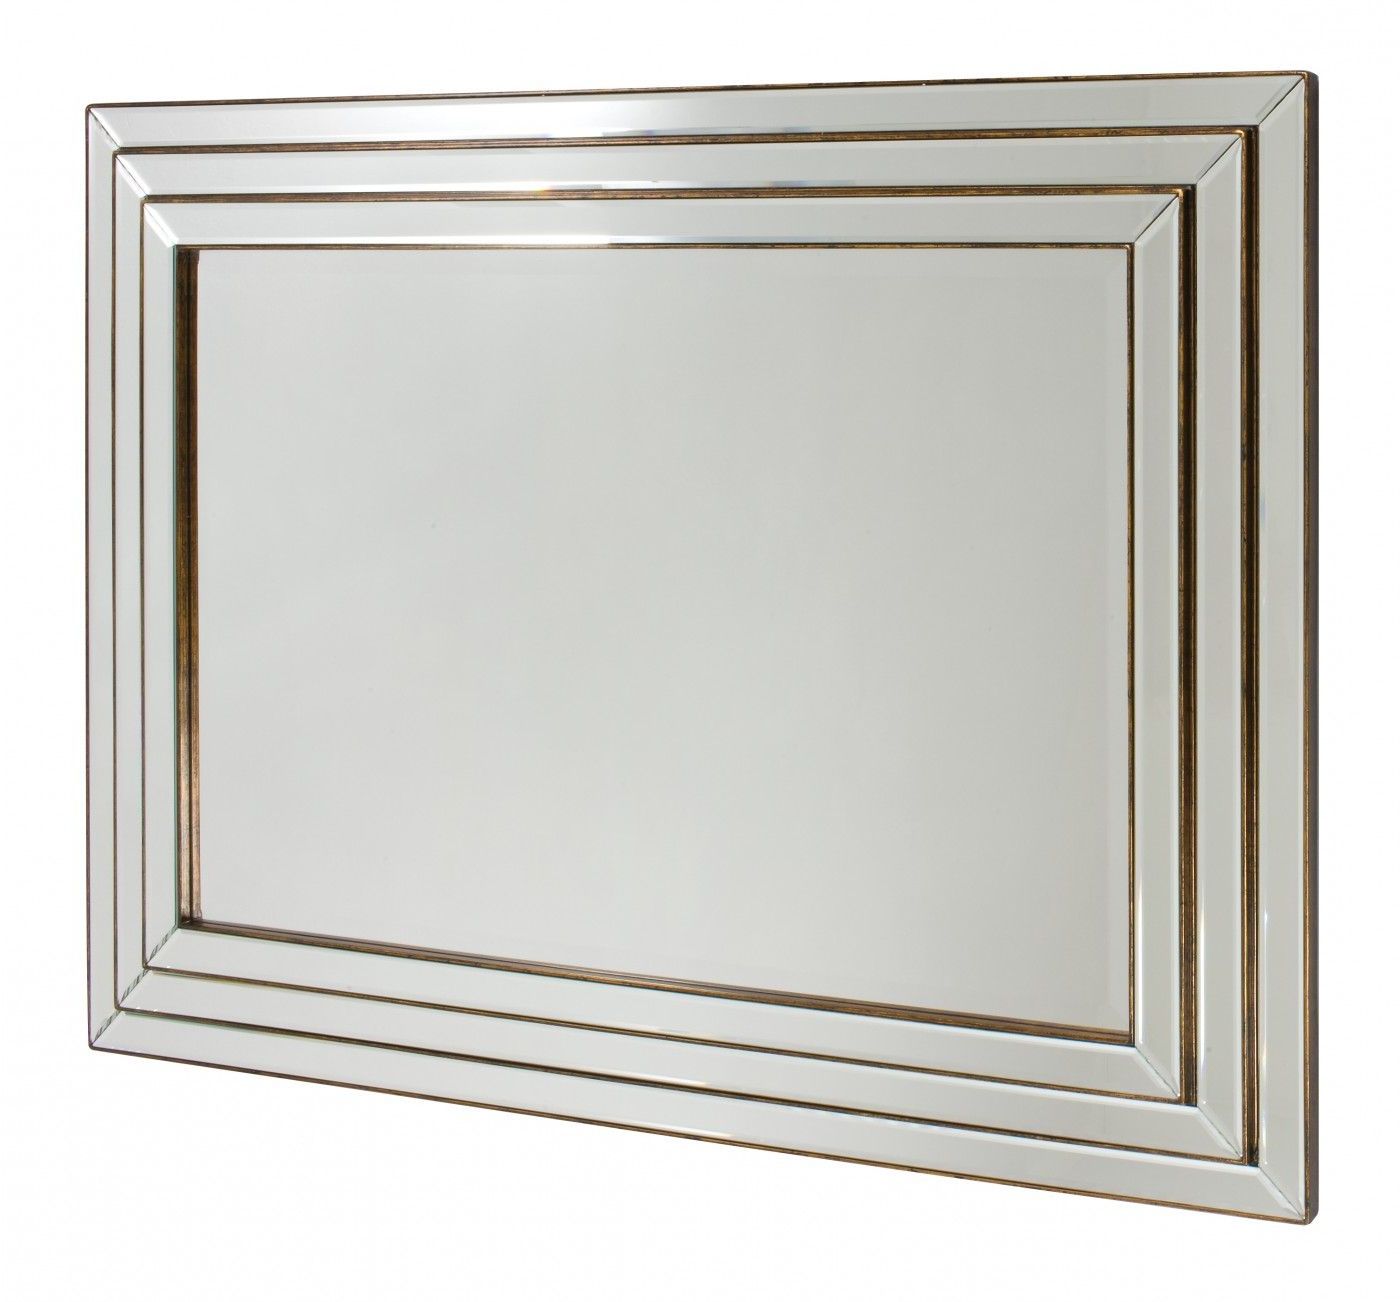 Rustic Wall Mirrors, Mirror With Regard To Silver And Bronze Wall Mirrors (View 4 of 15)